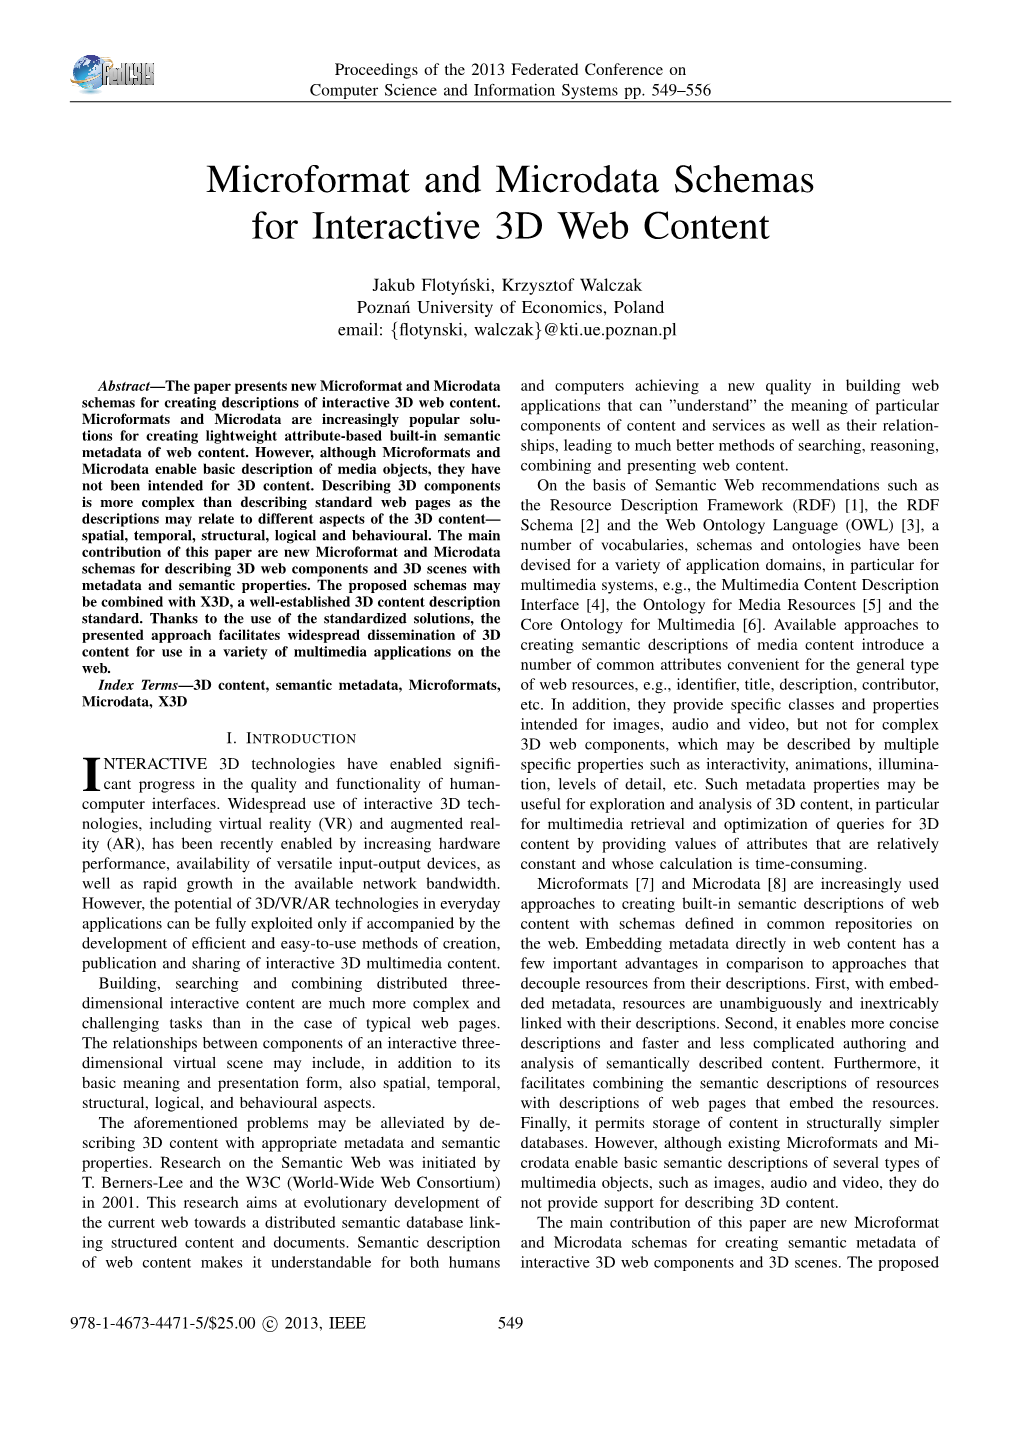 Microformat and Microdata Schemas for Interactive 3D Web Content